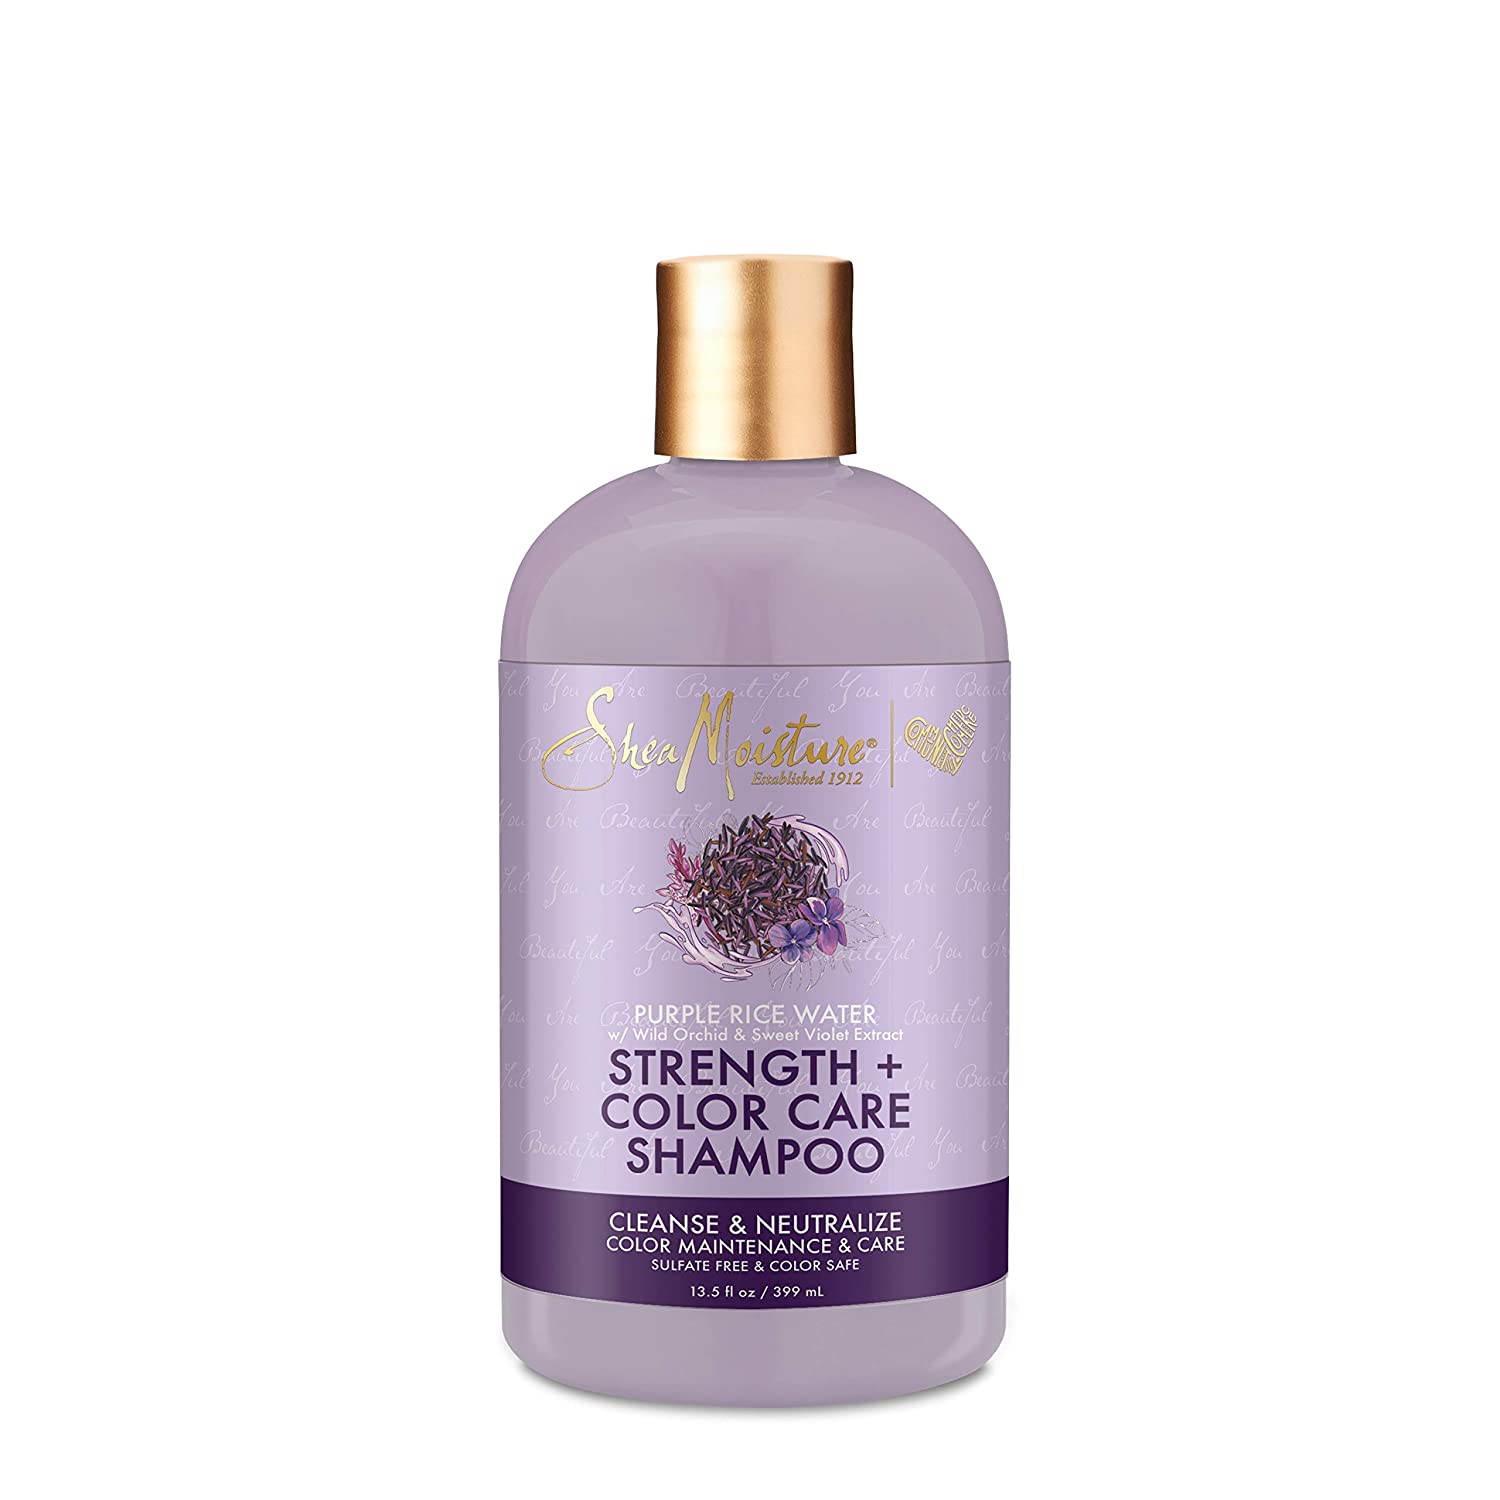  10. SheaMoisture Purple Rice Water Strength & Color Care Shampoo is ideal for cool tones. 